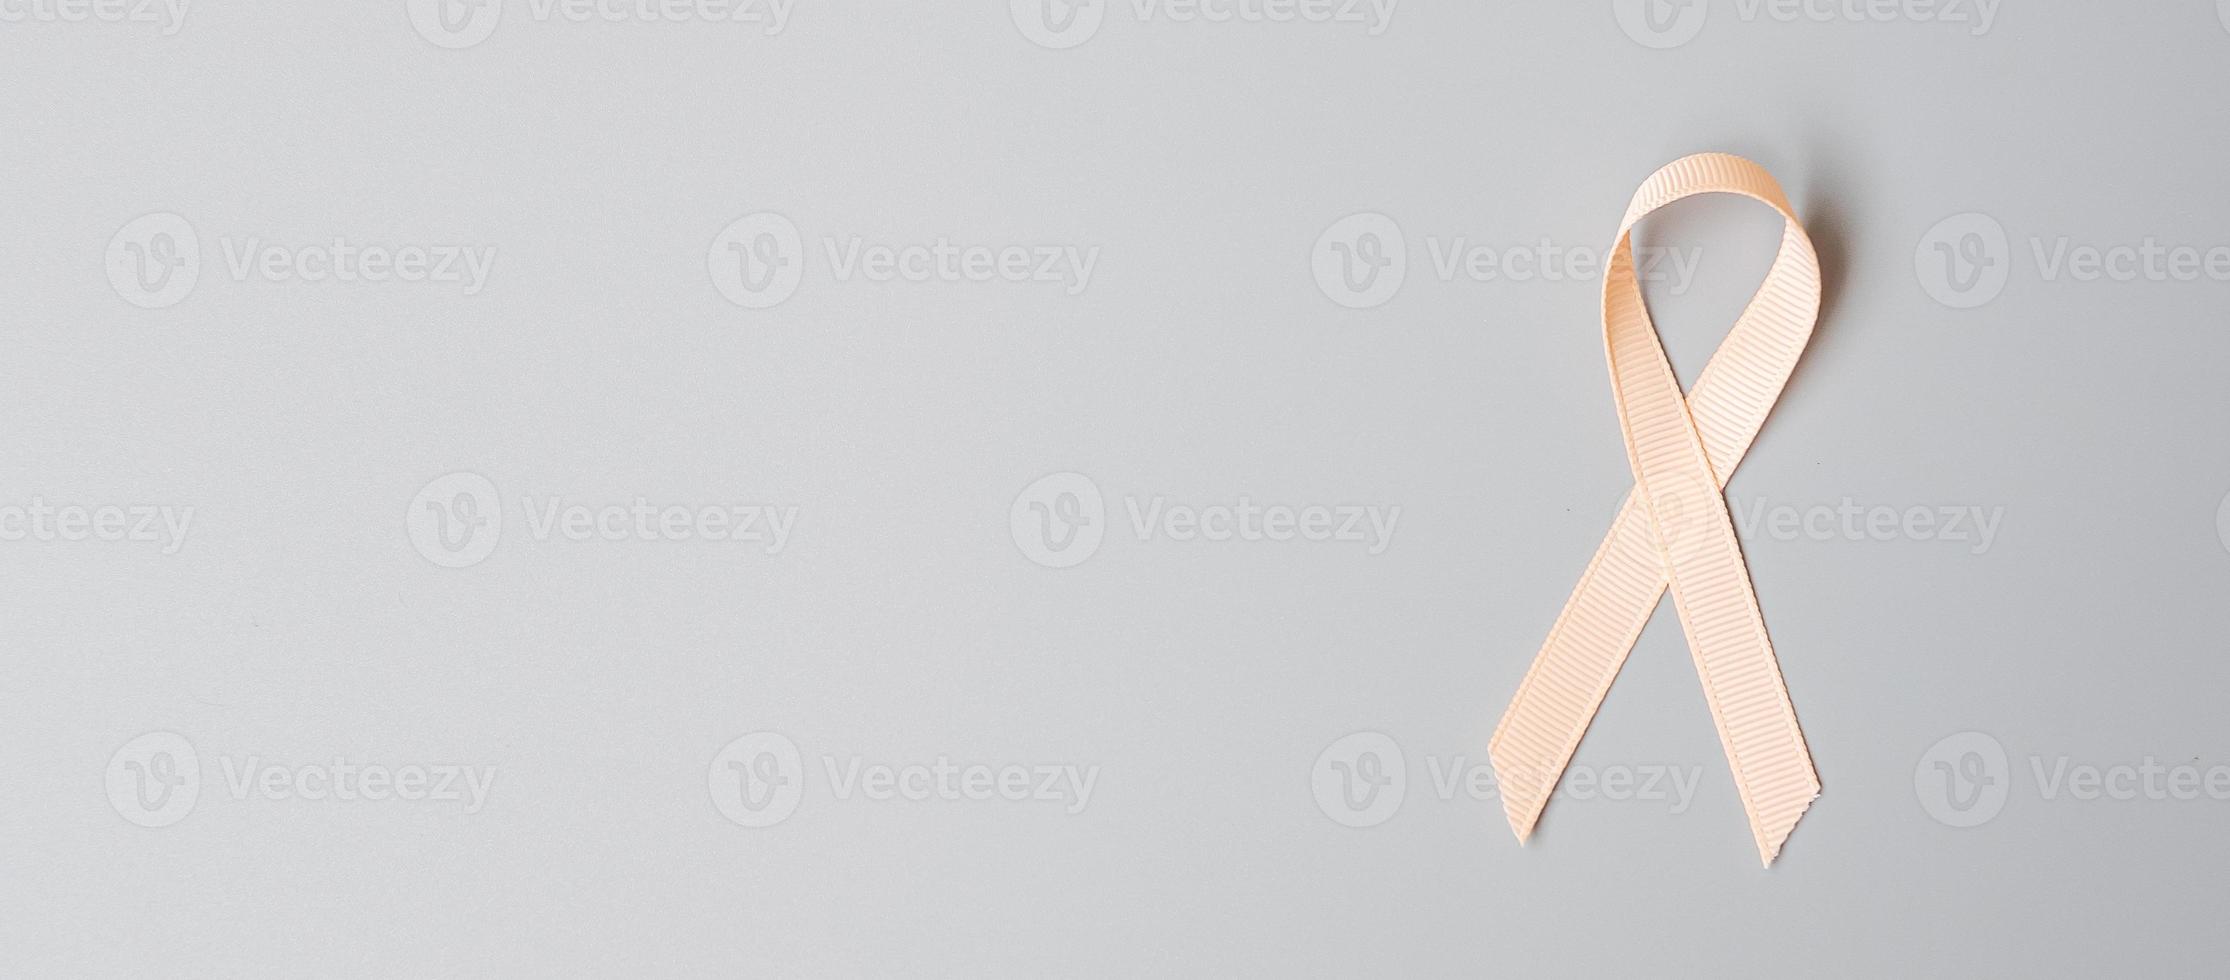 September Uterine Cancer Awareness month, Peach Ribbon for supporting people living and illness. Healthcare and World cancer day concept photo